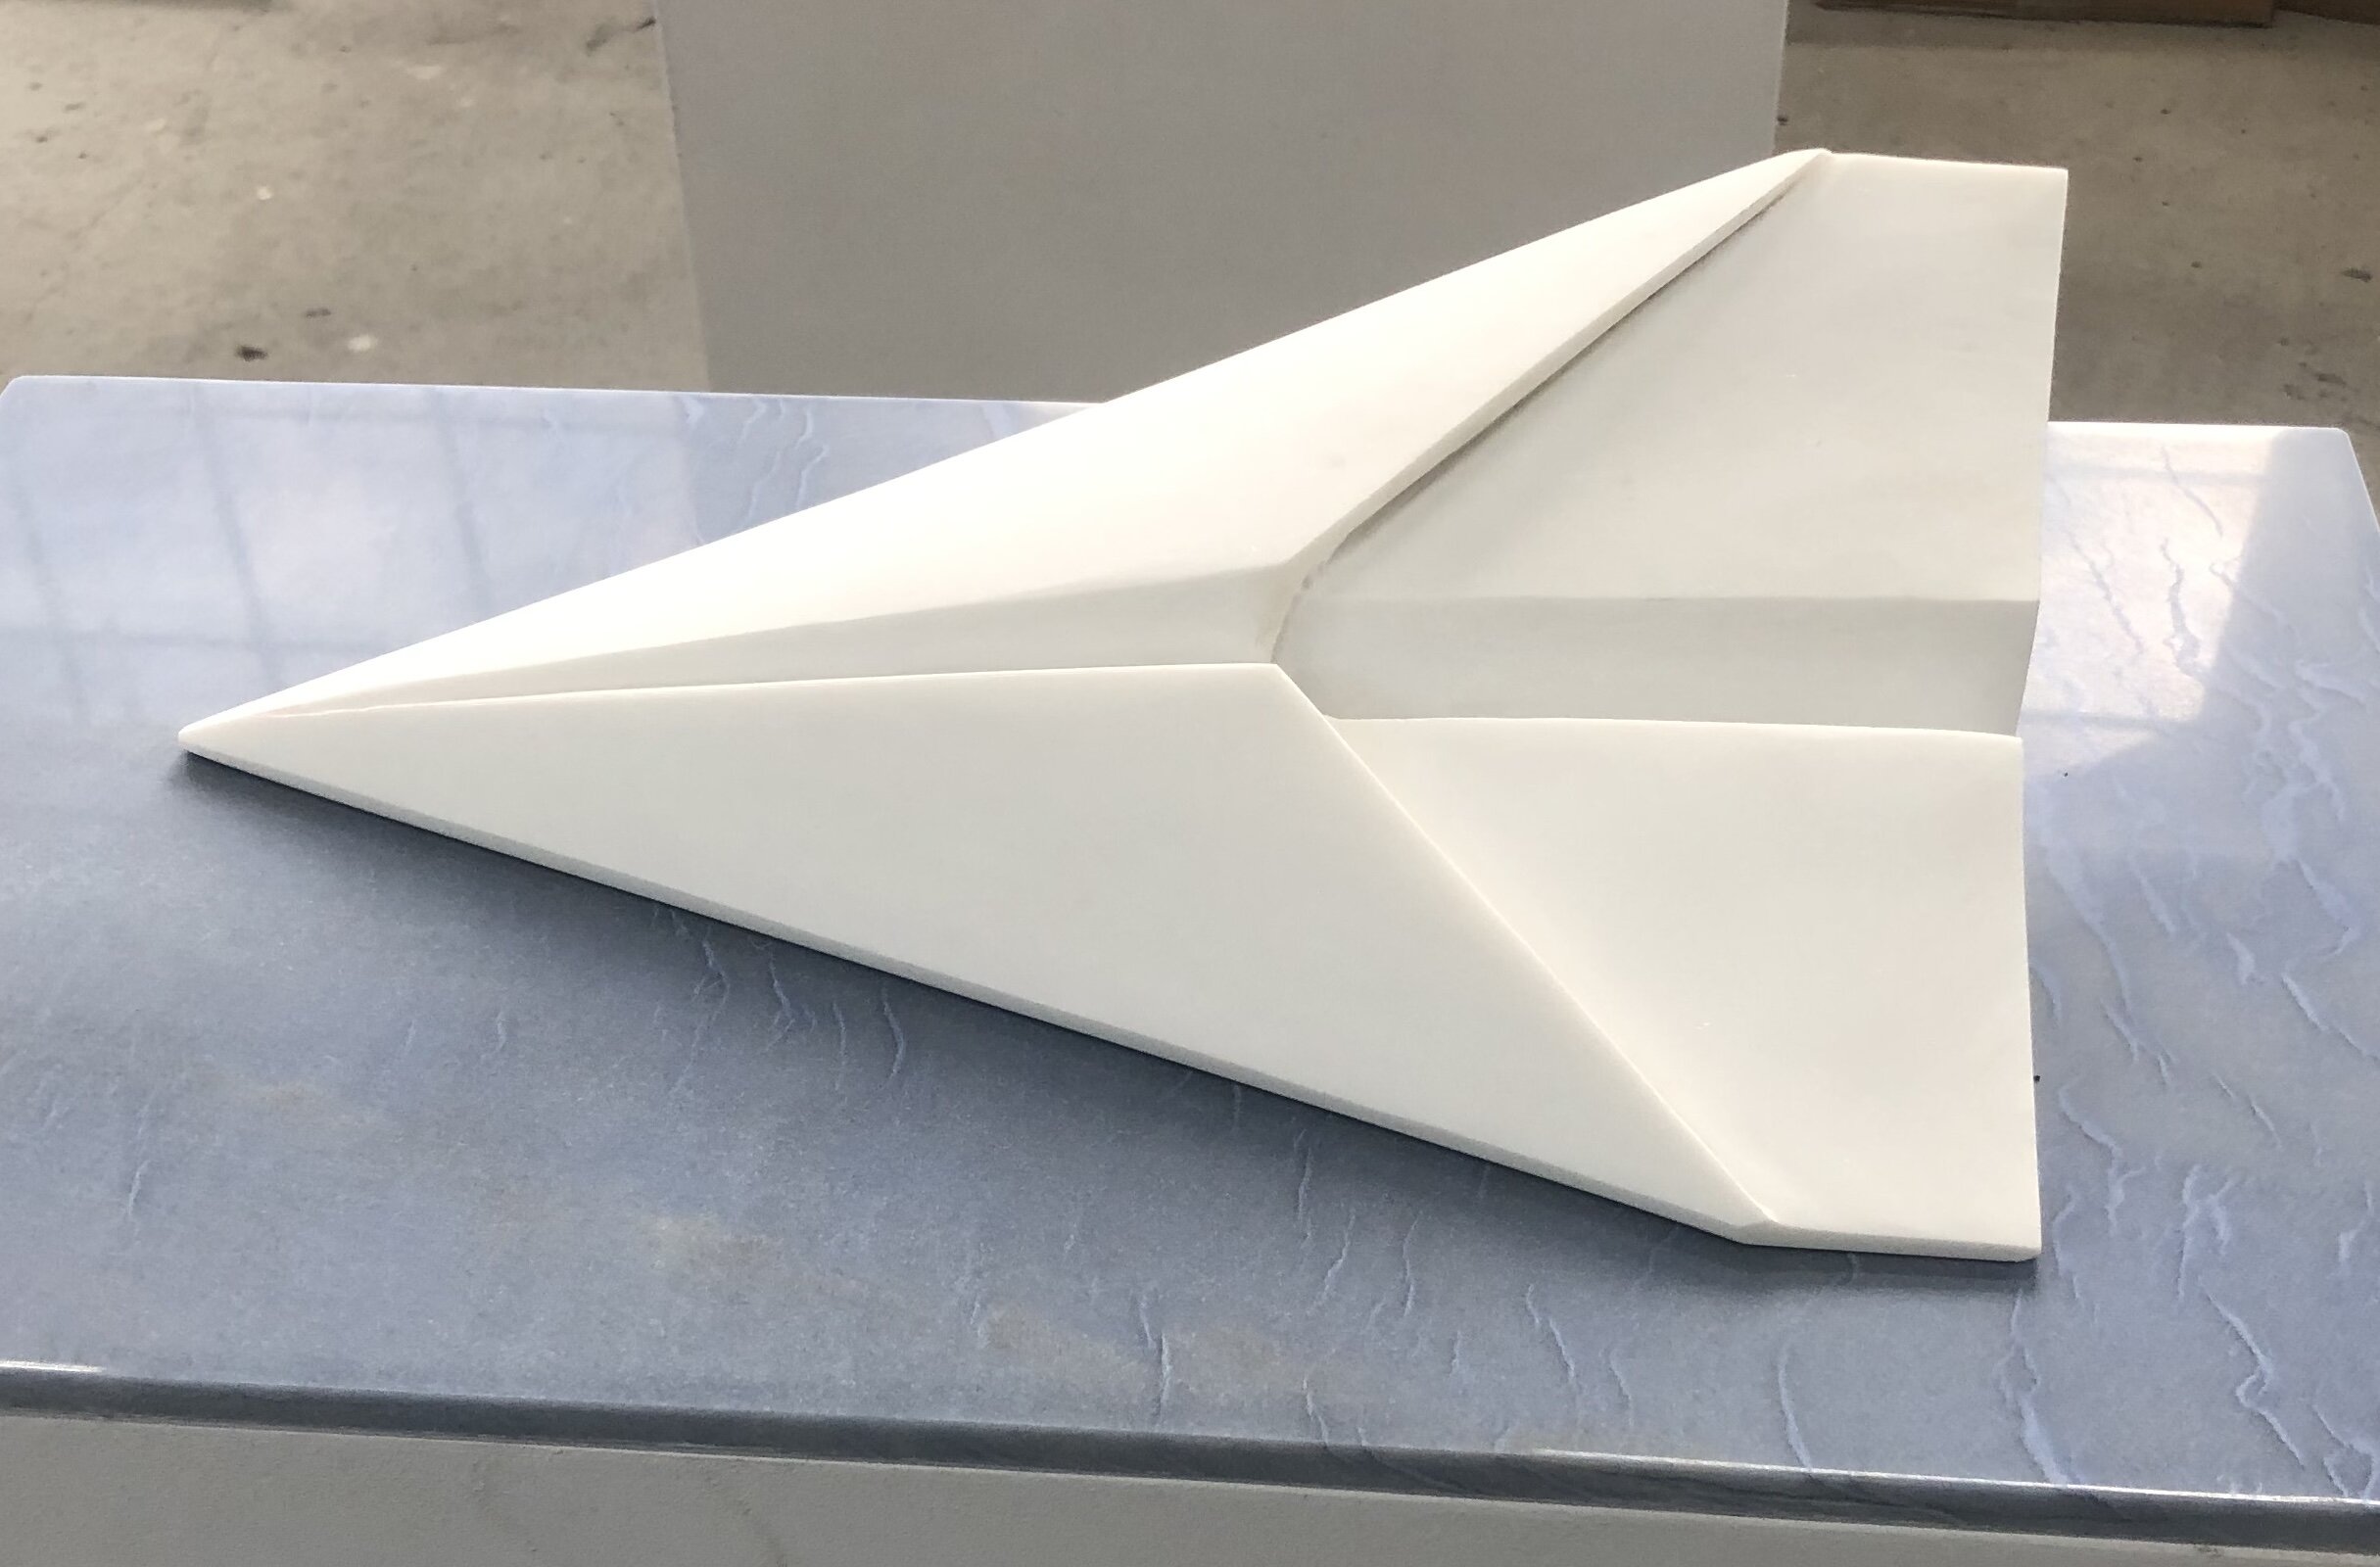 Andreas Blank, Untitled, 2019 Marble, 25x25x110cm